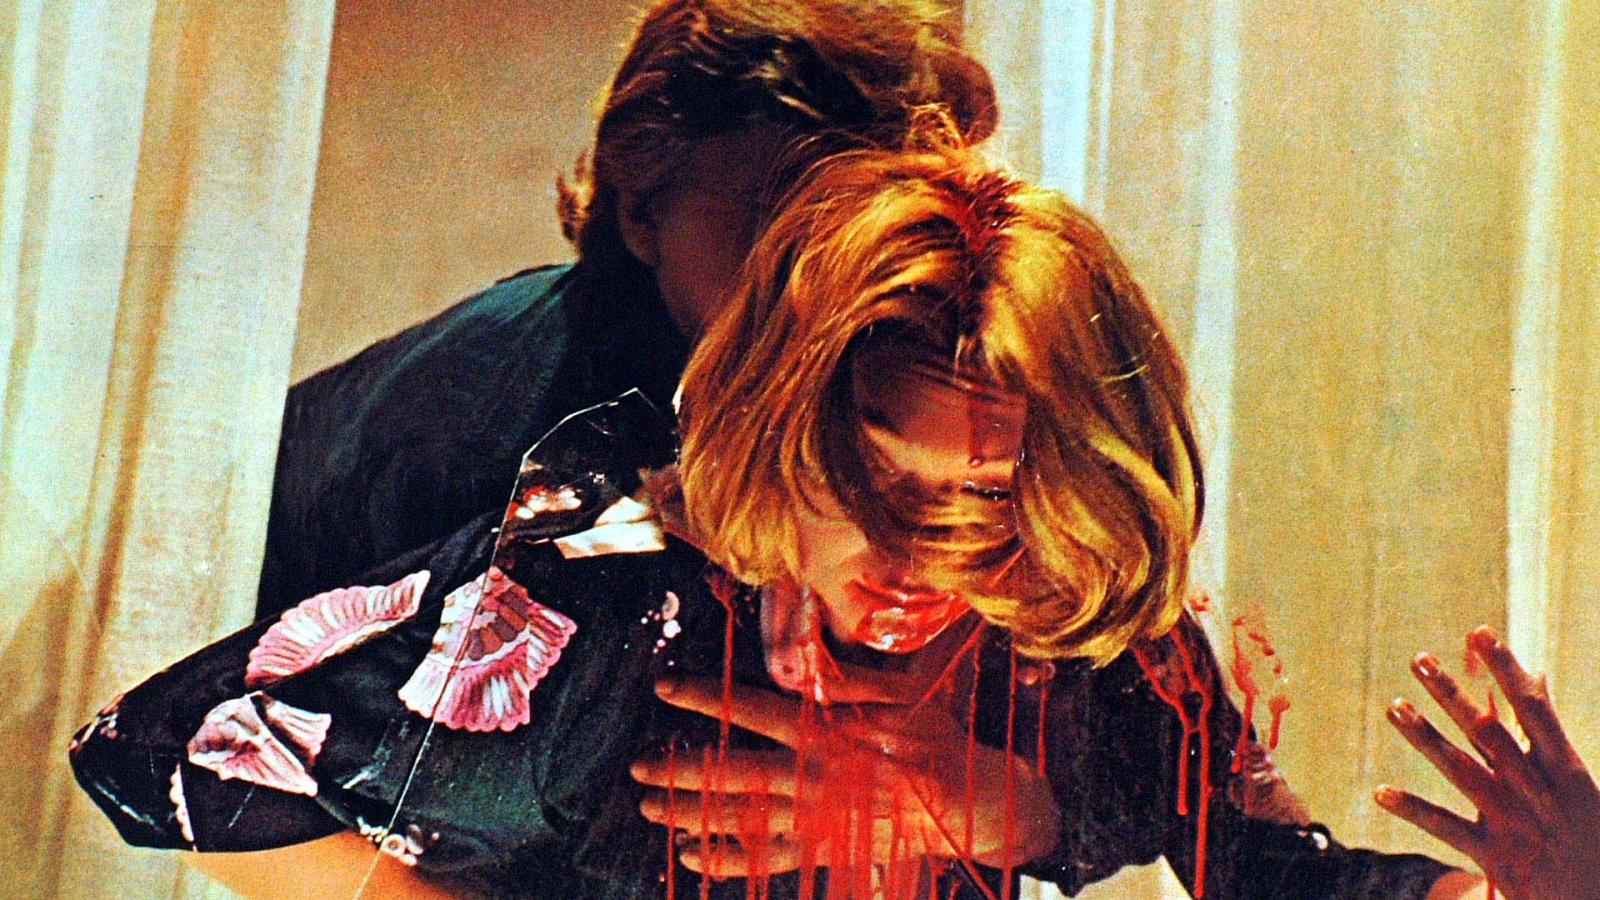 Tarantino Recommends These 10 Horror Movies For Perfect Halloween Spooks - image 2